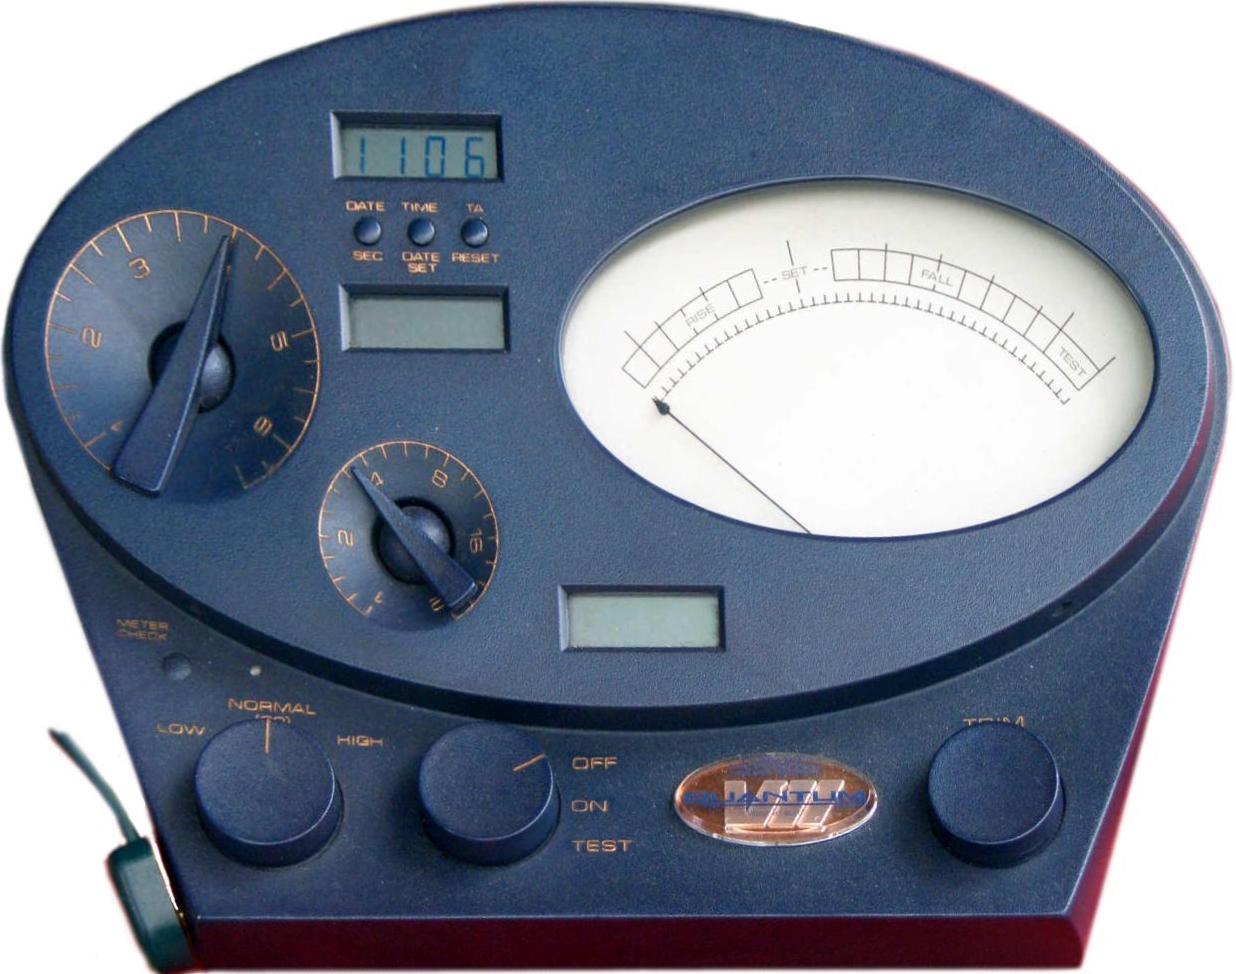 E-meter as used by scientologists